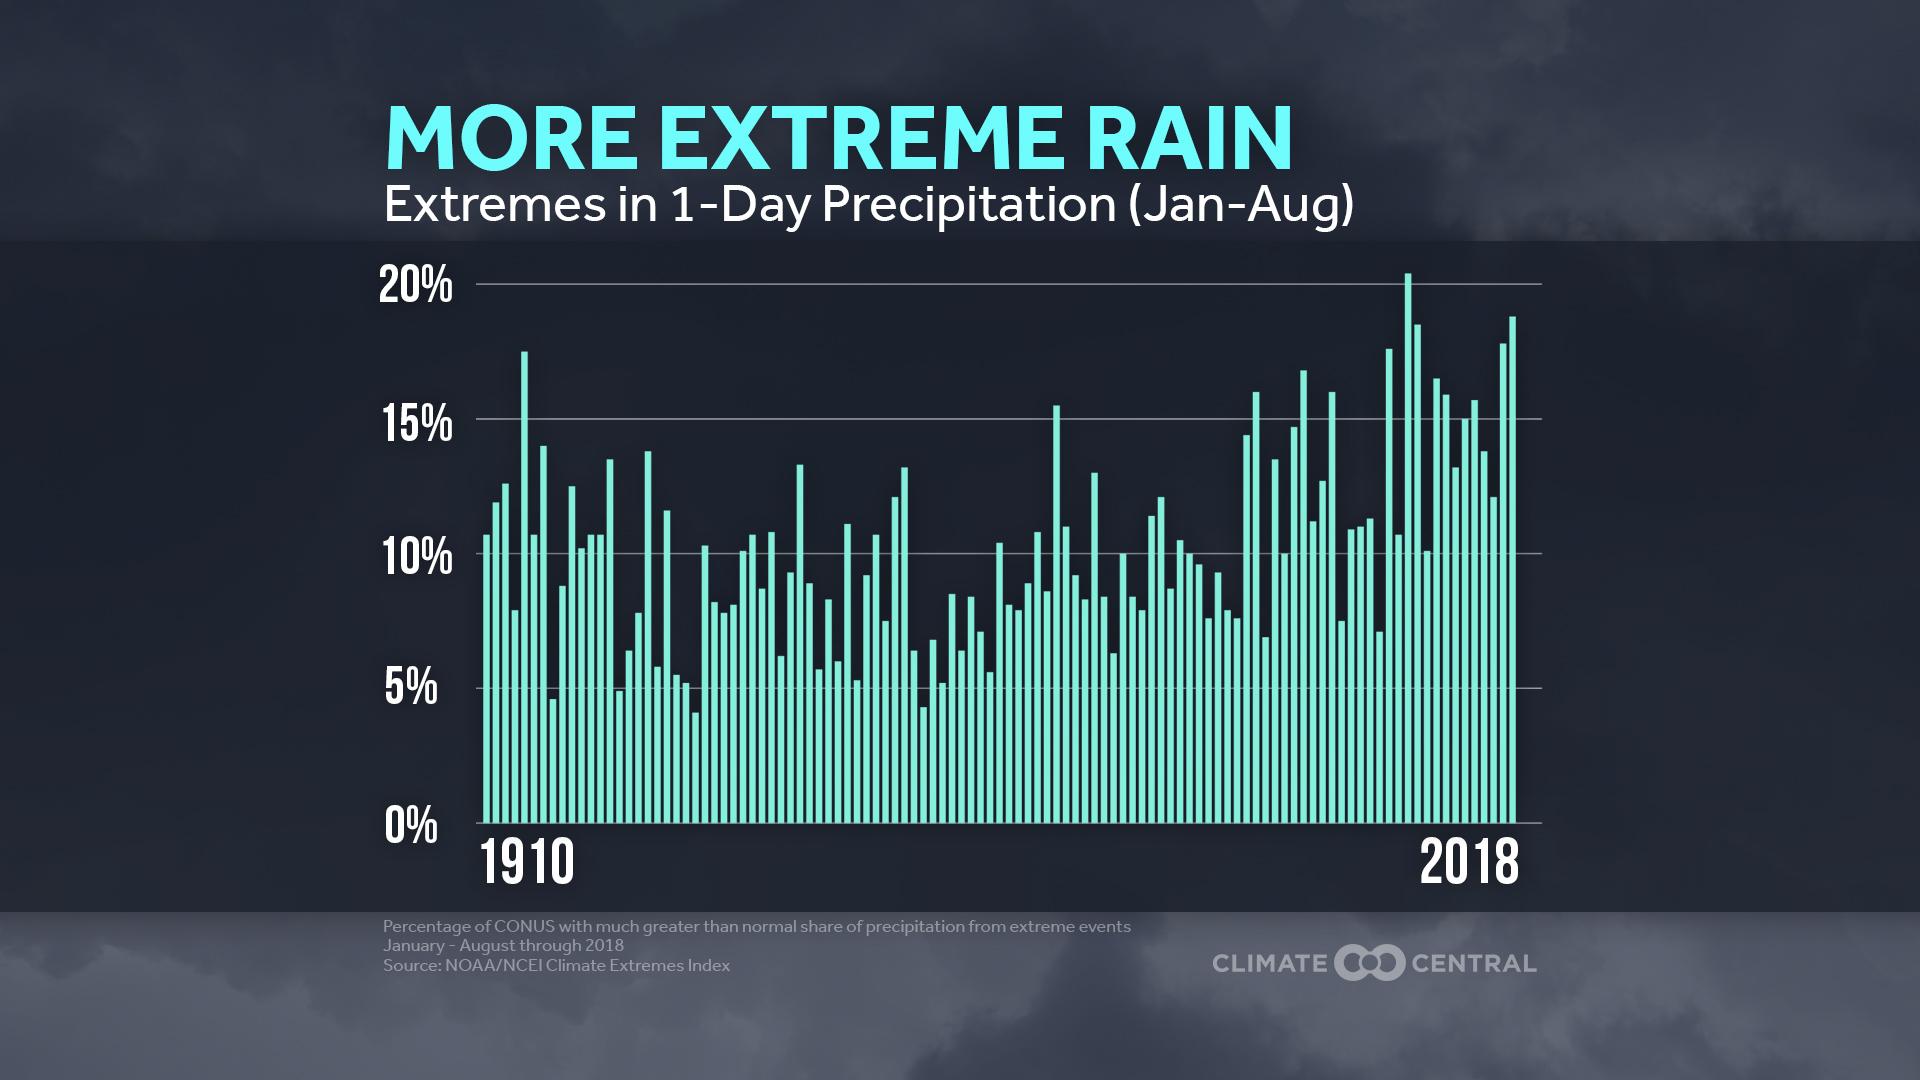 Set 2 - Tropical Cyclone Records & Rainfall Extremes